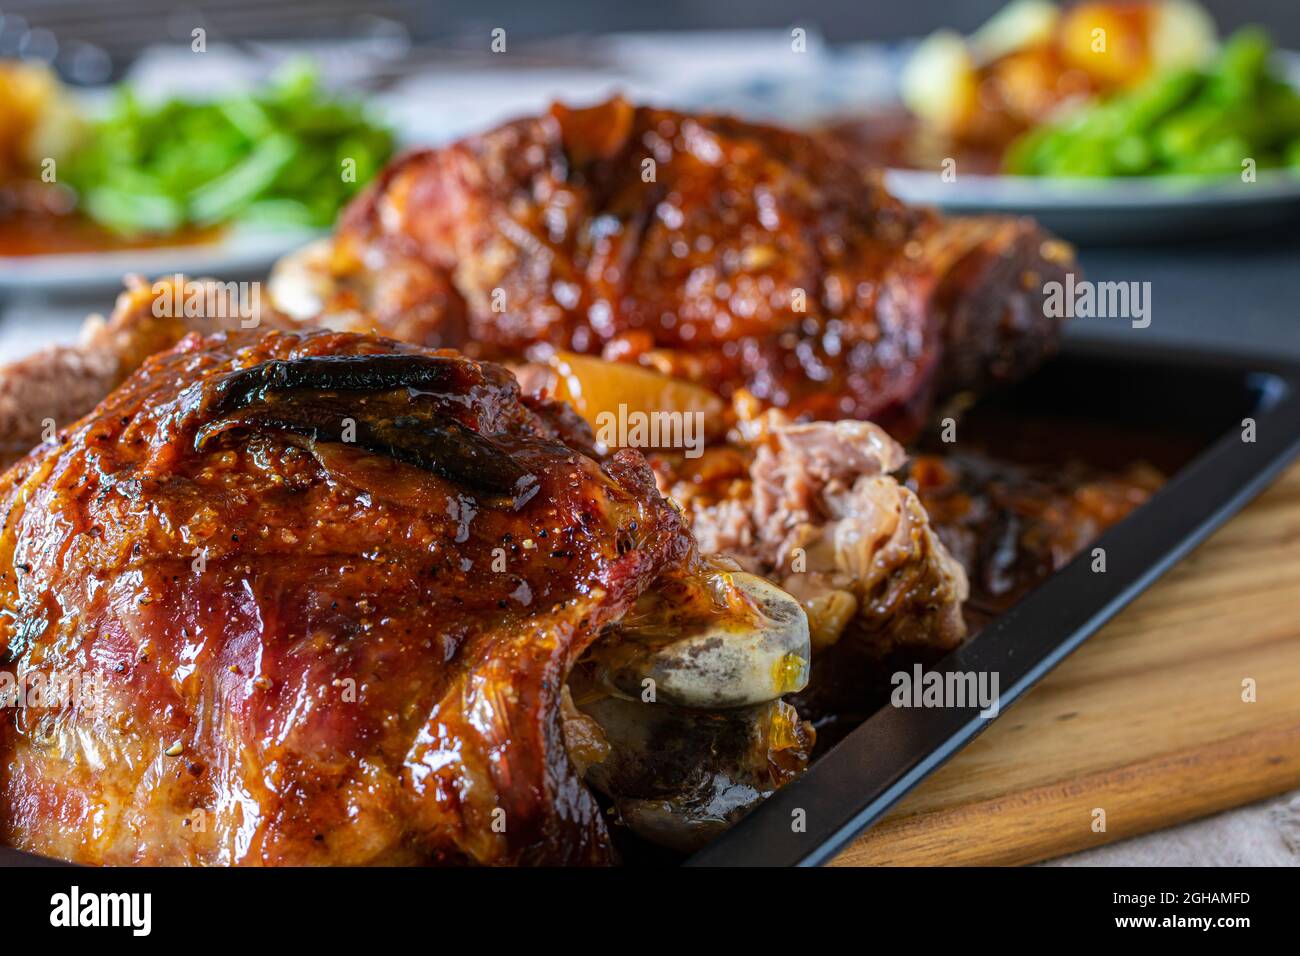 Roast Turkey legs or shanks on a table for dinner or lunch with blurred background. Closeup and front view Stock Photo